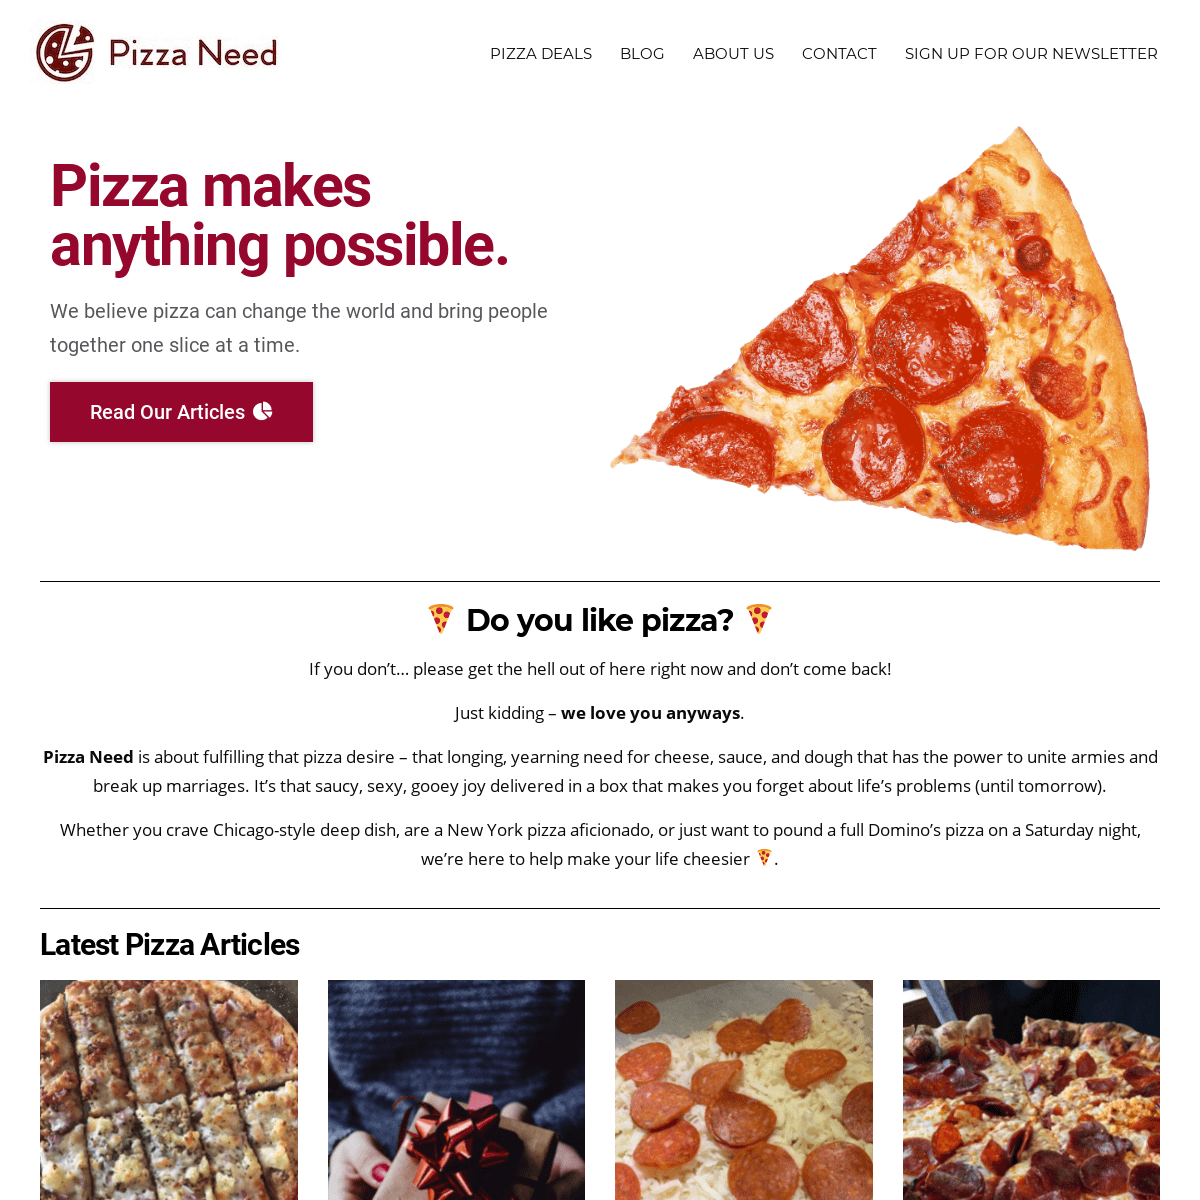 A complete backup of https://pizzaneed.com